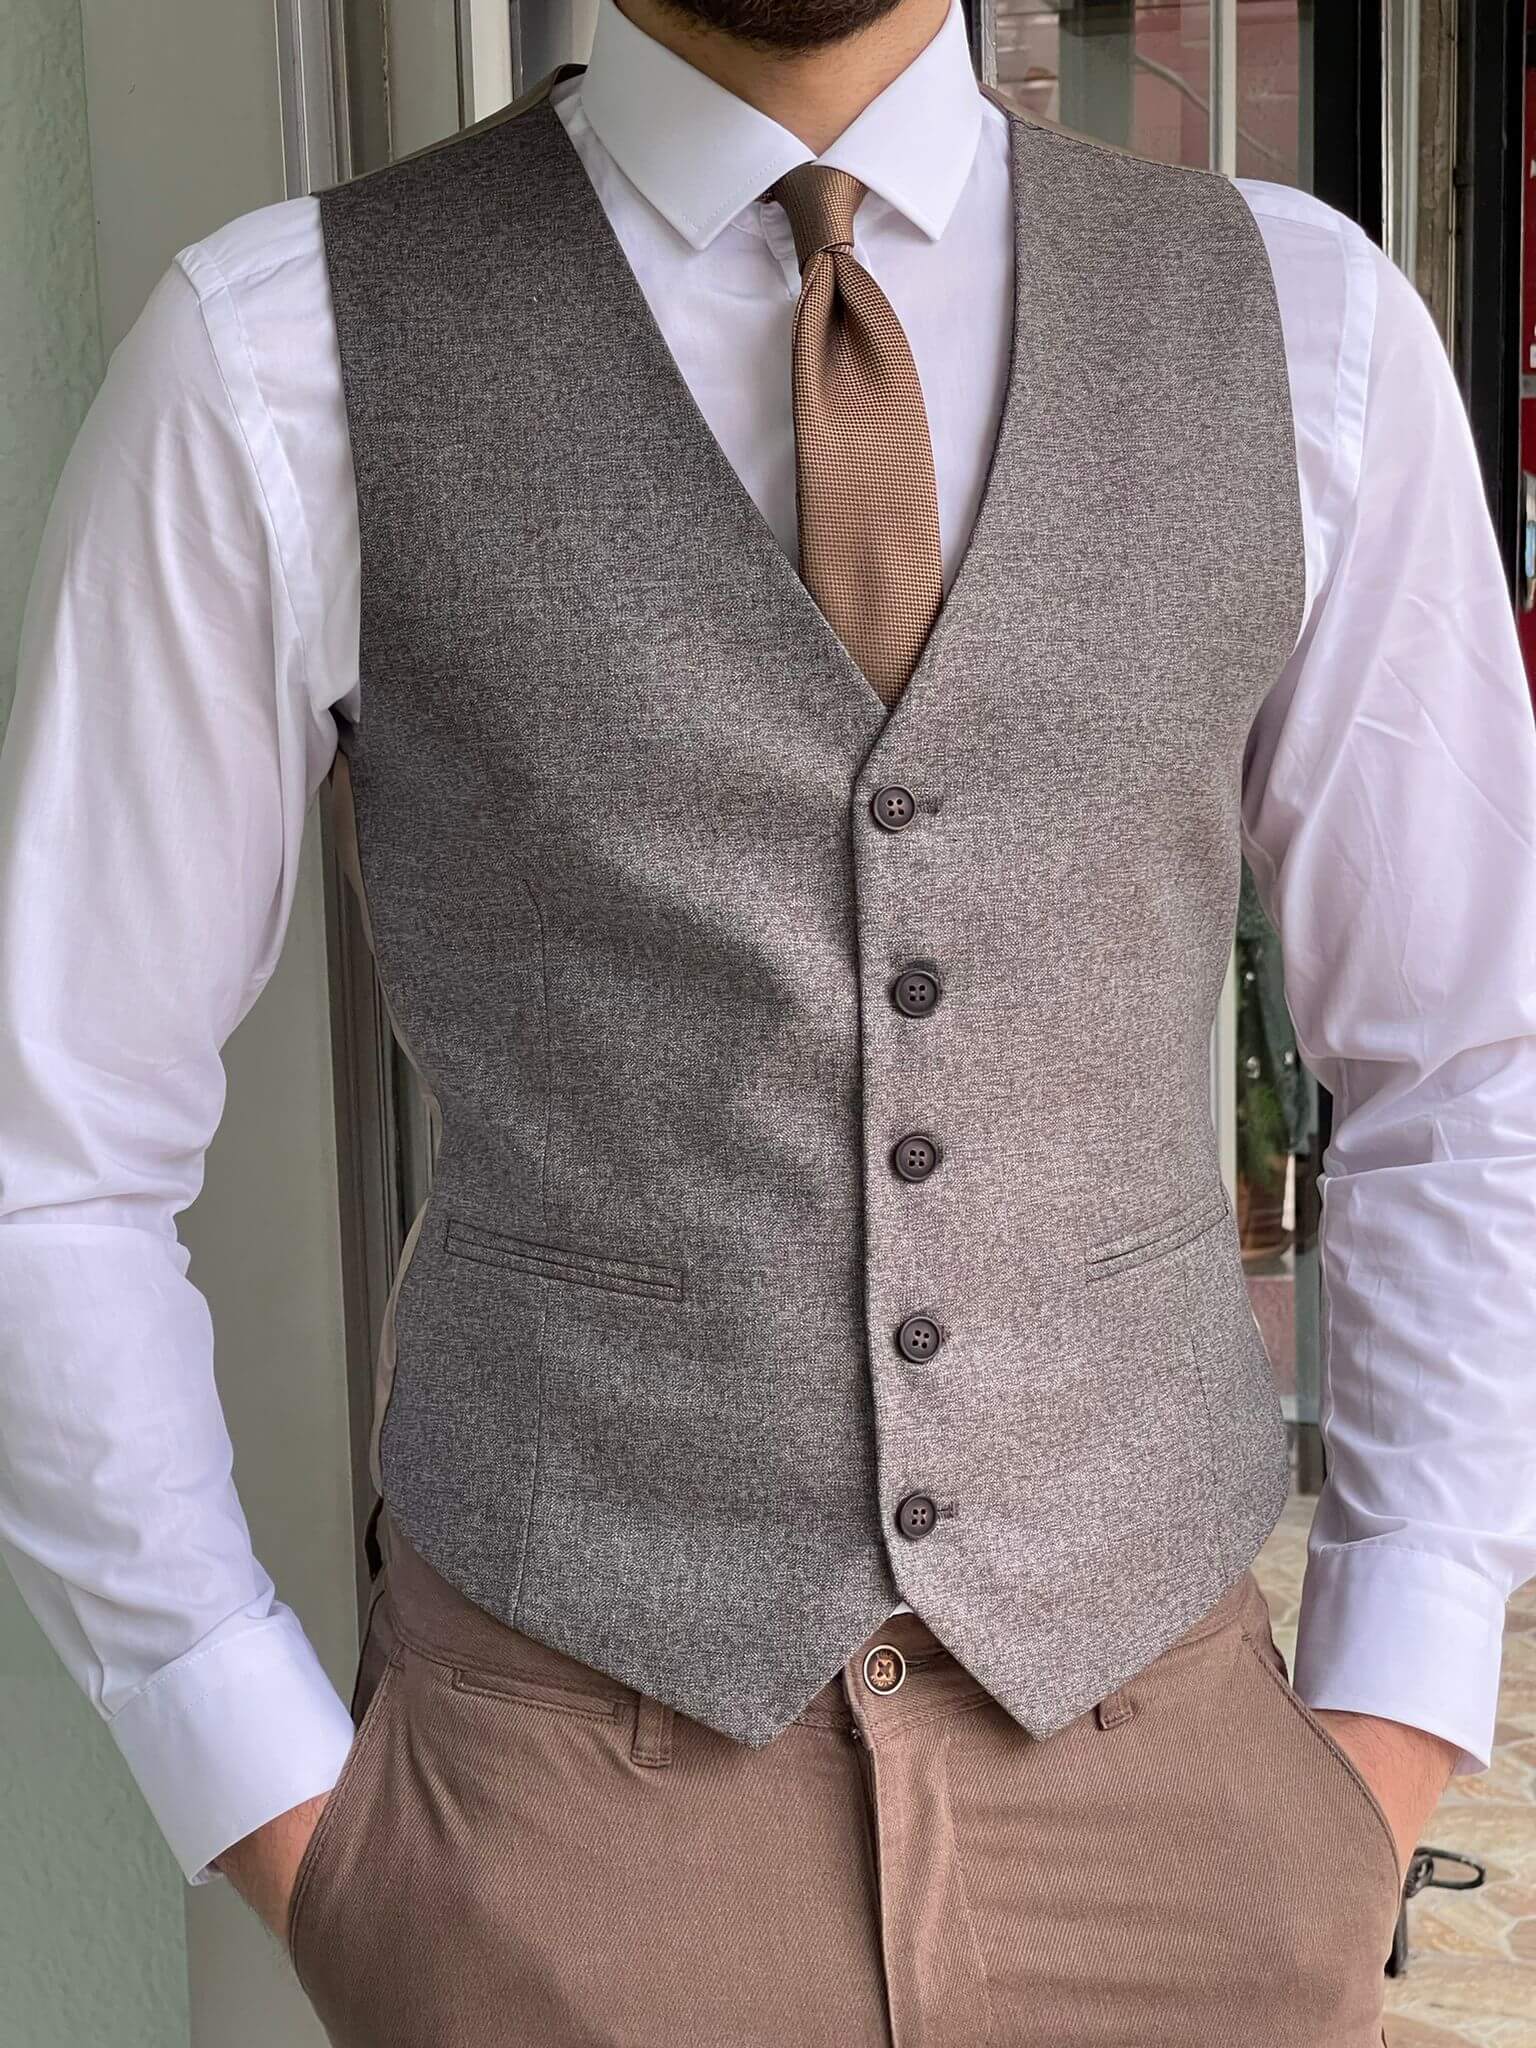 A close-up of a beige waistcoat with buttons and a V-neckline